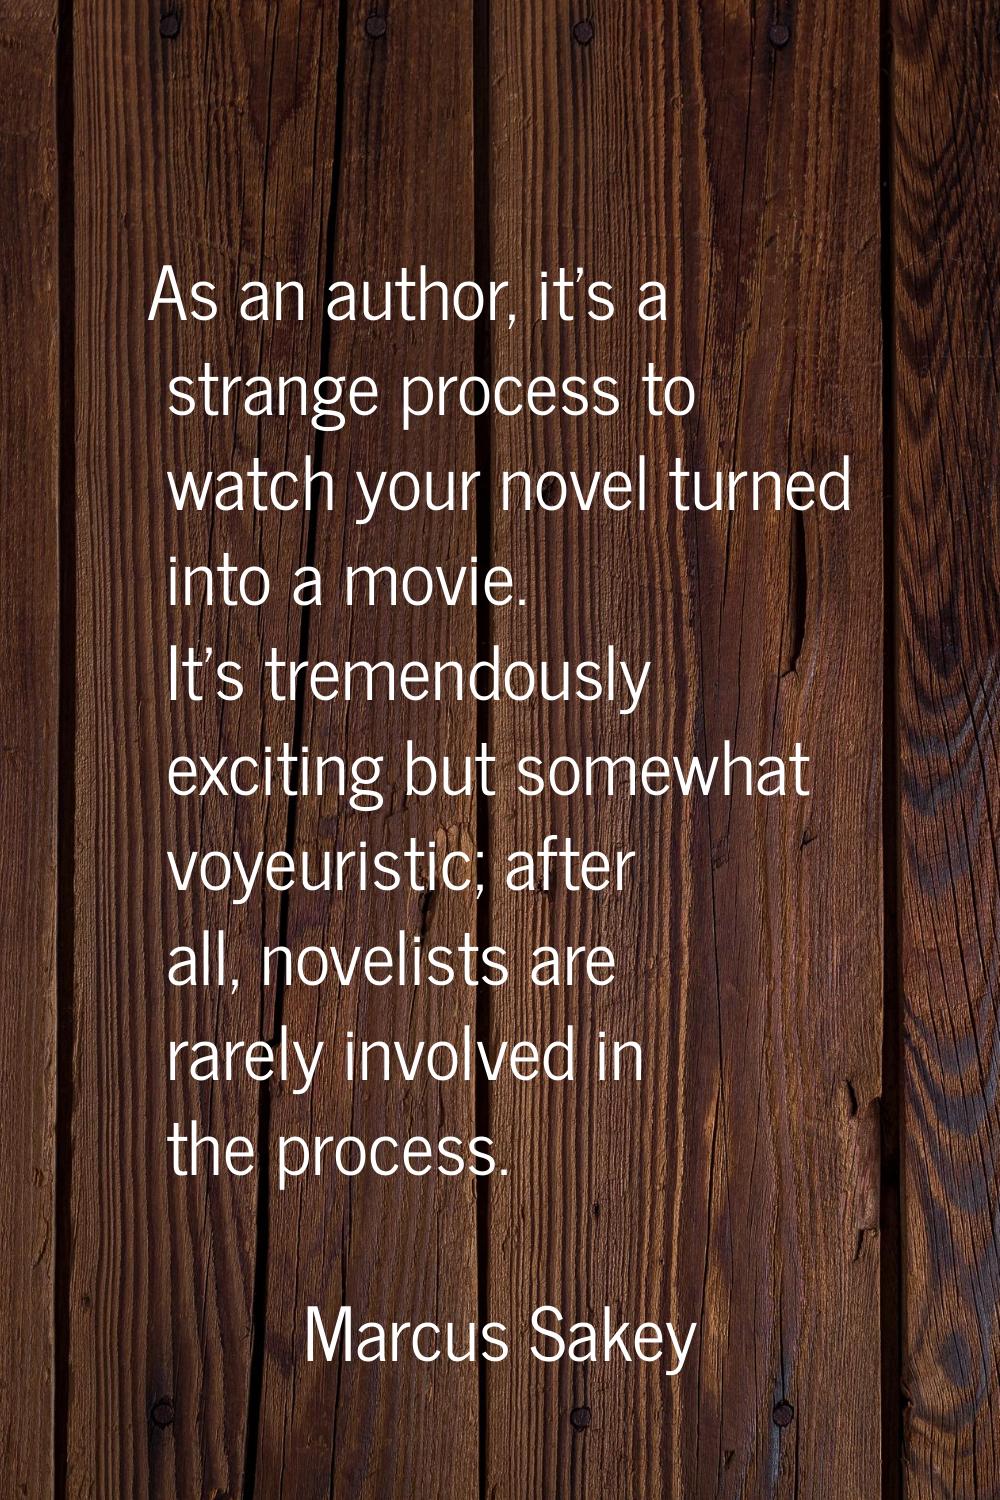 As an author, it's a strange process to watch your novel turned into a movie. It's tremendously exc